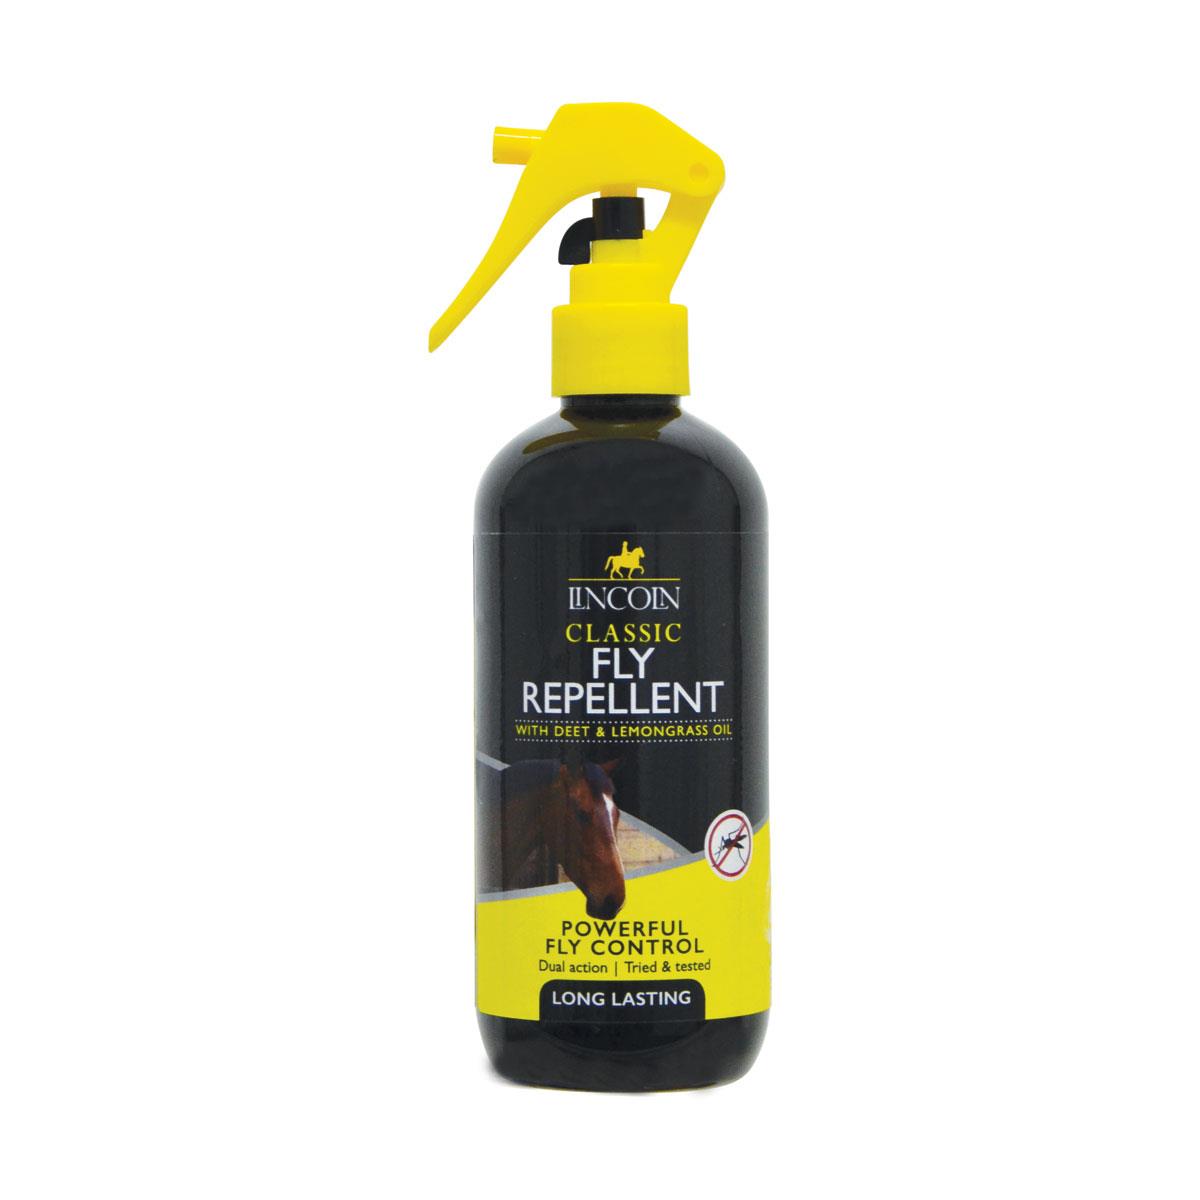 LINCOLN CLASSIC FLY REPELLENT LIQUID: Enduring Protection Against Flies